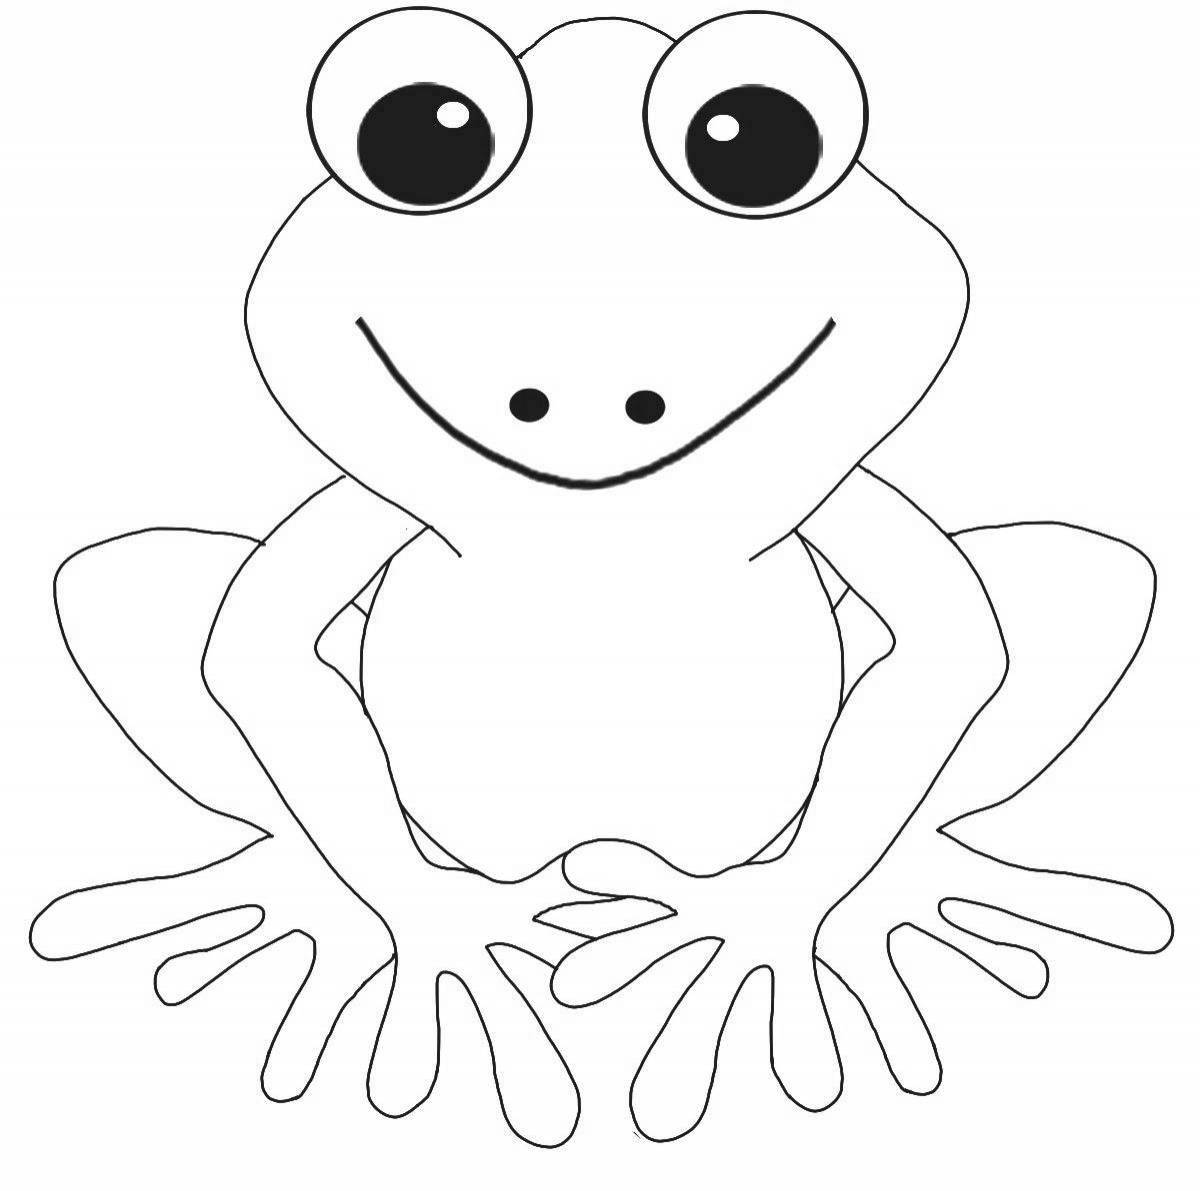 Colorful bright frog coloring book for children 3-4 years old